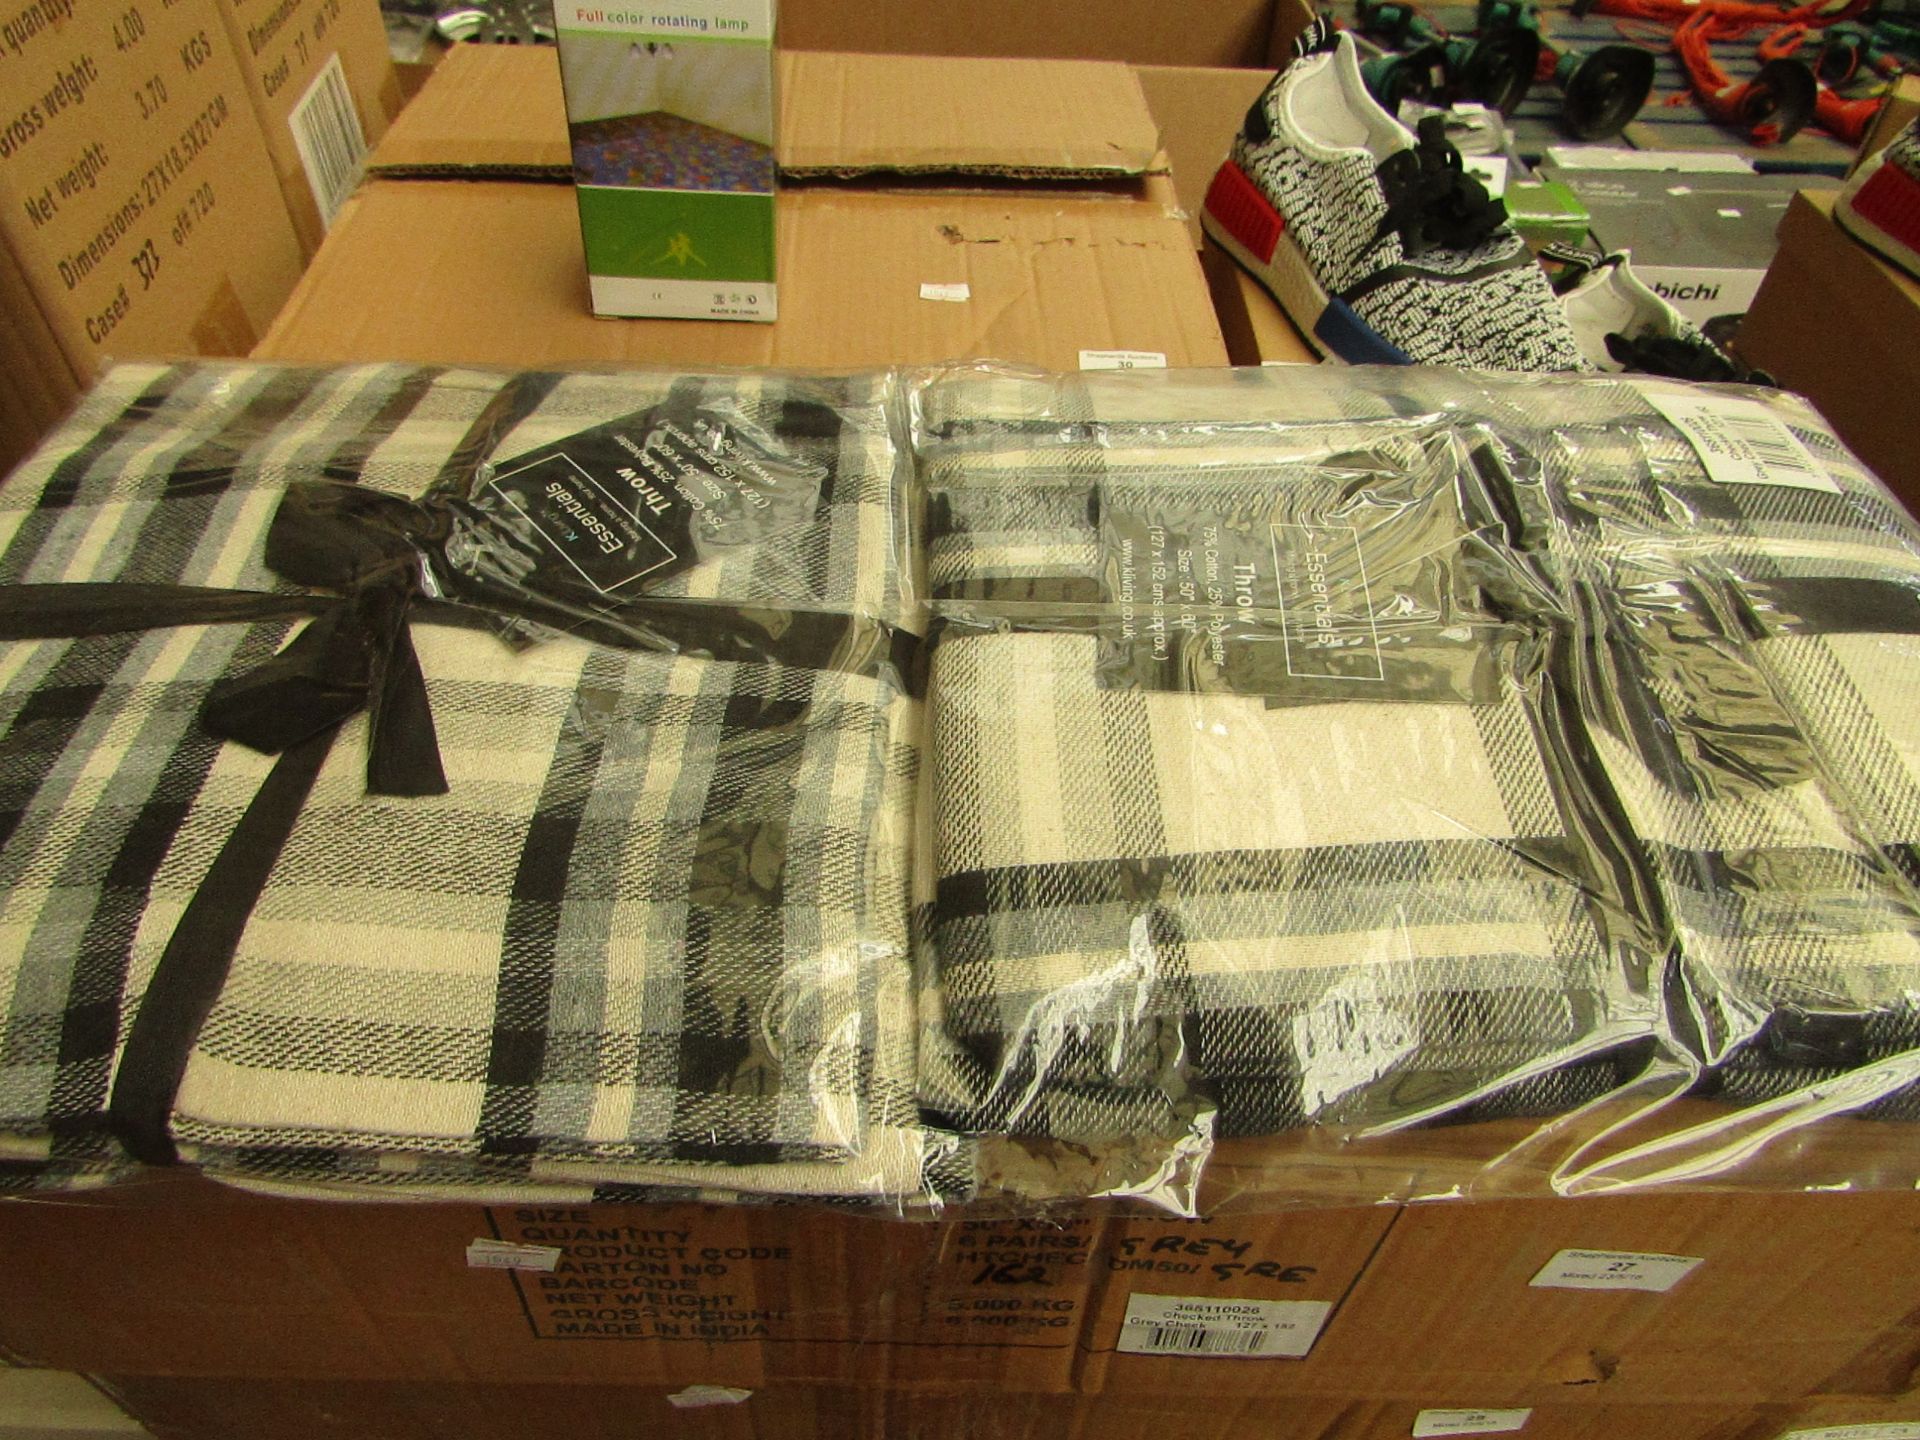 6x Checkered throws, all new and packaged.